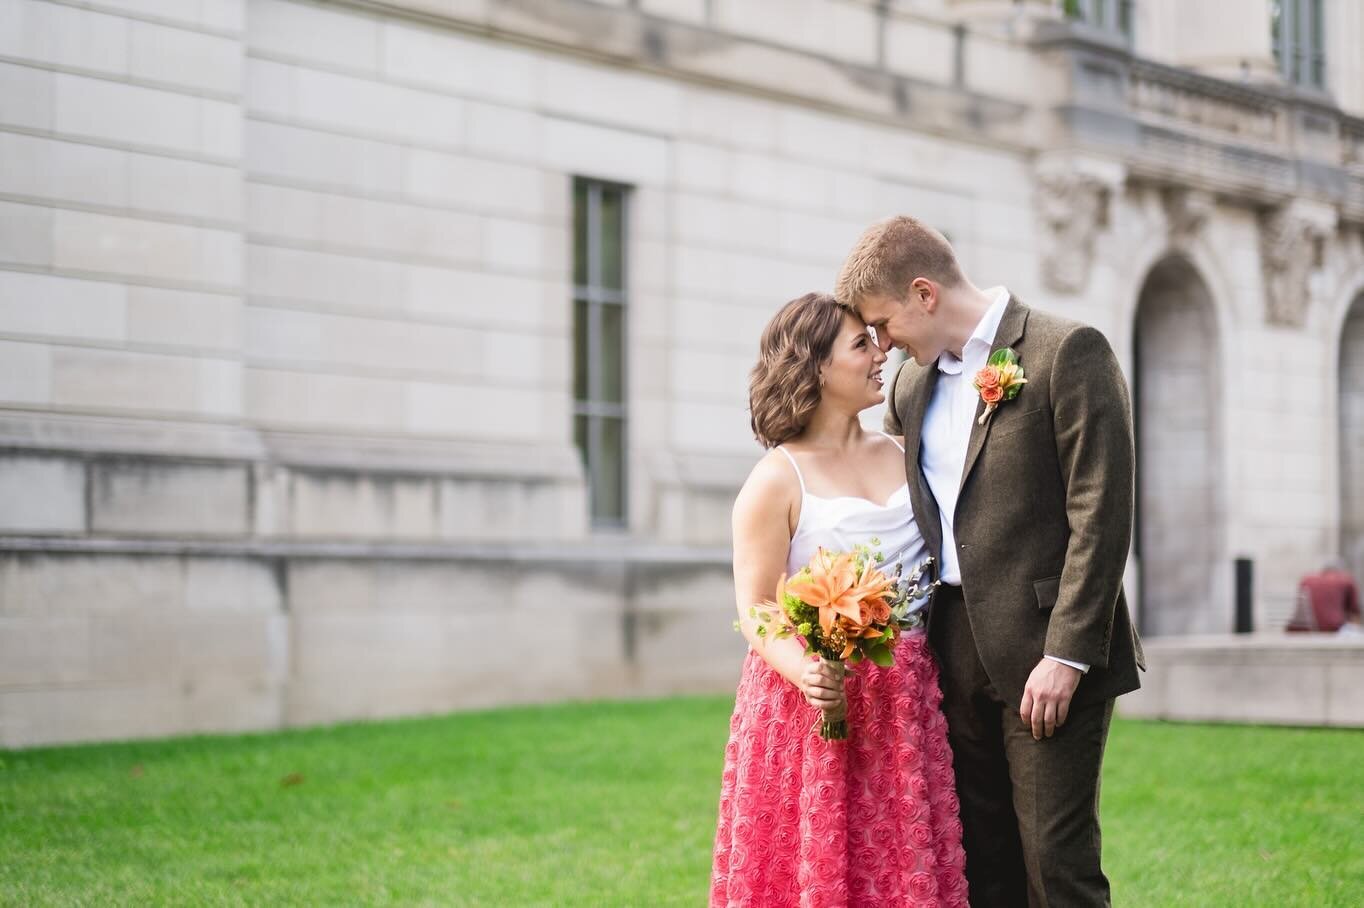 In a world where wedding traditions often take center stage, Juliana &amp; Russell decided to write their own love story. 

From a picturesque stroll through the heart of OSU campus to exchanging heartfelt vows at the charming Seventh Son Brewery, th